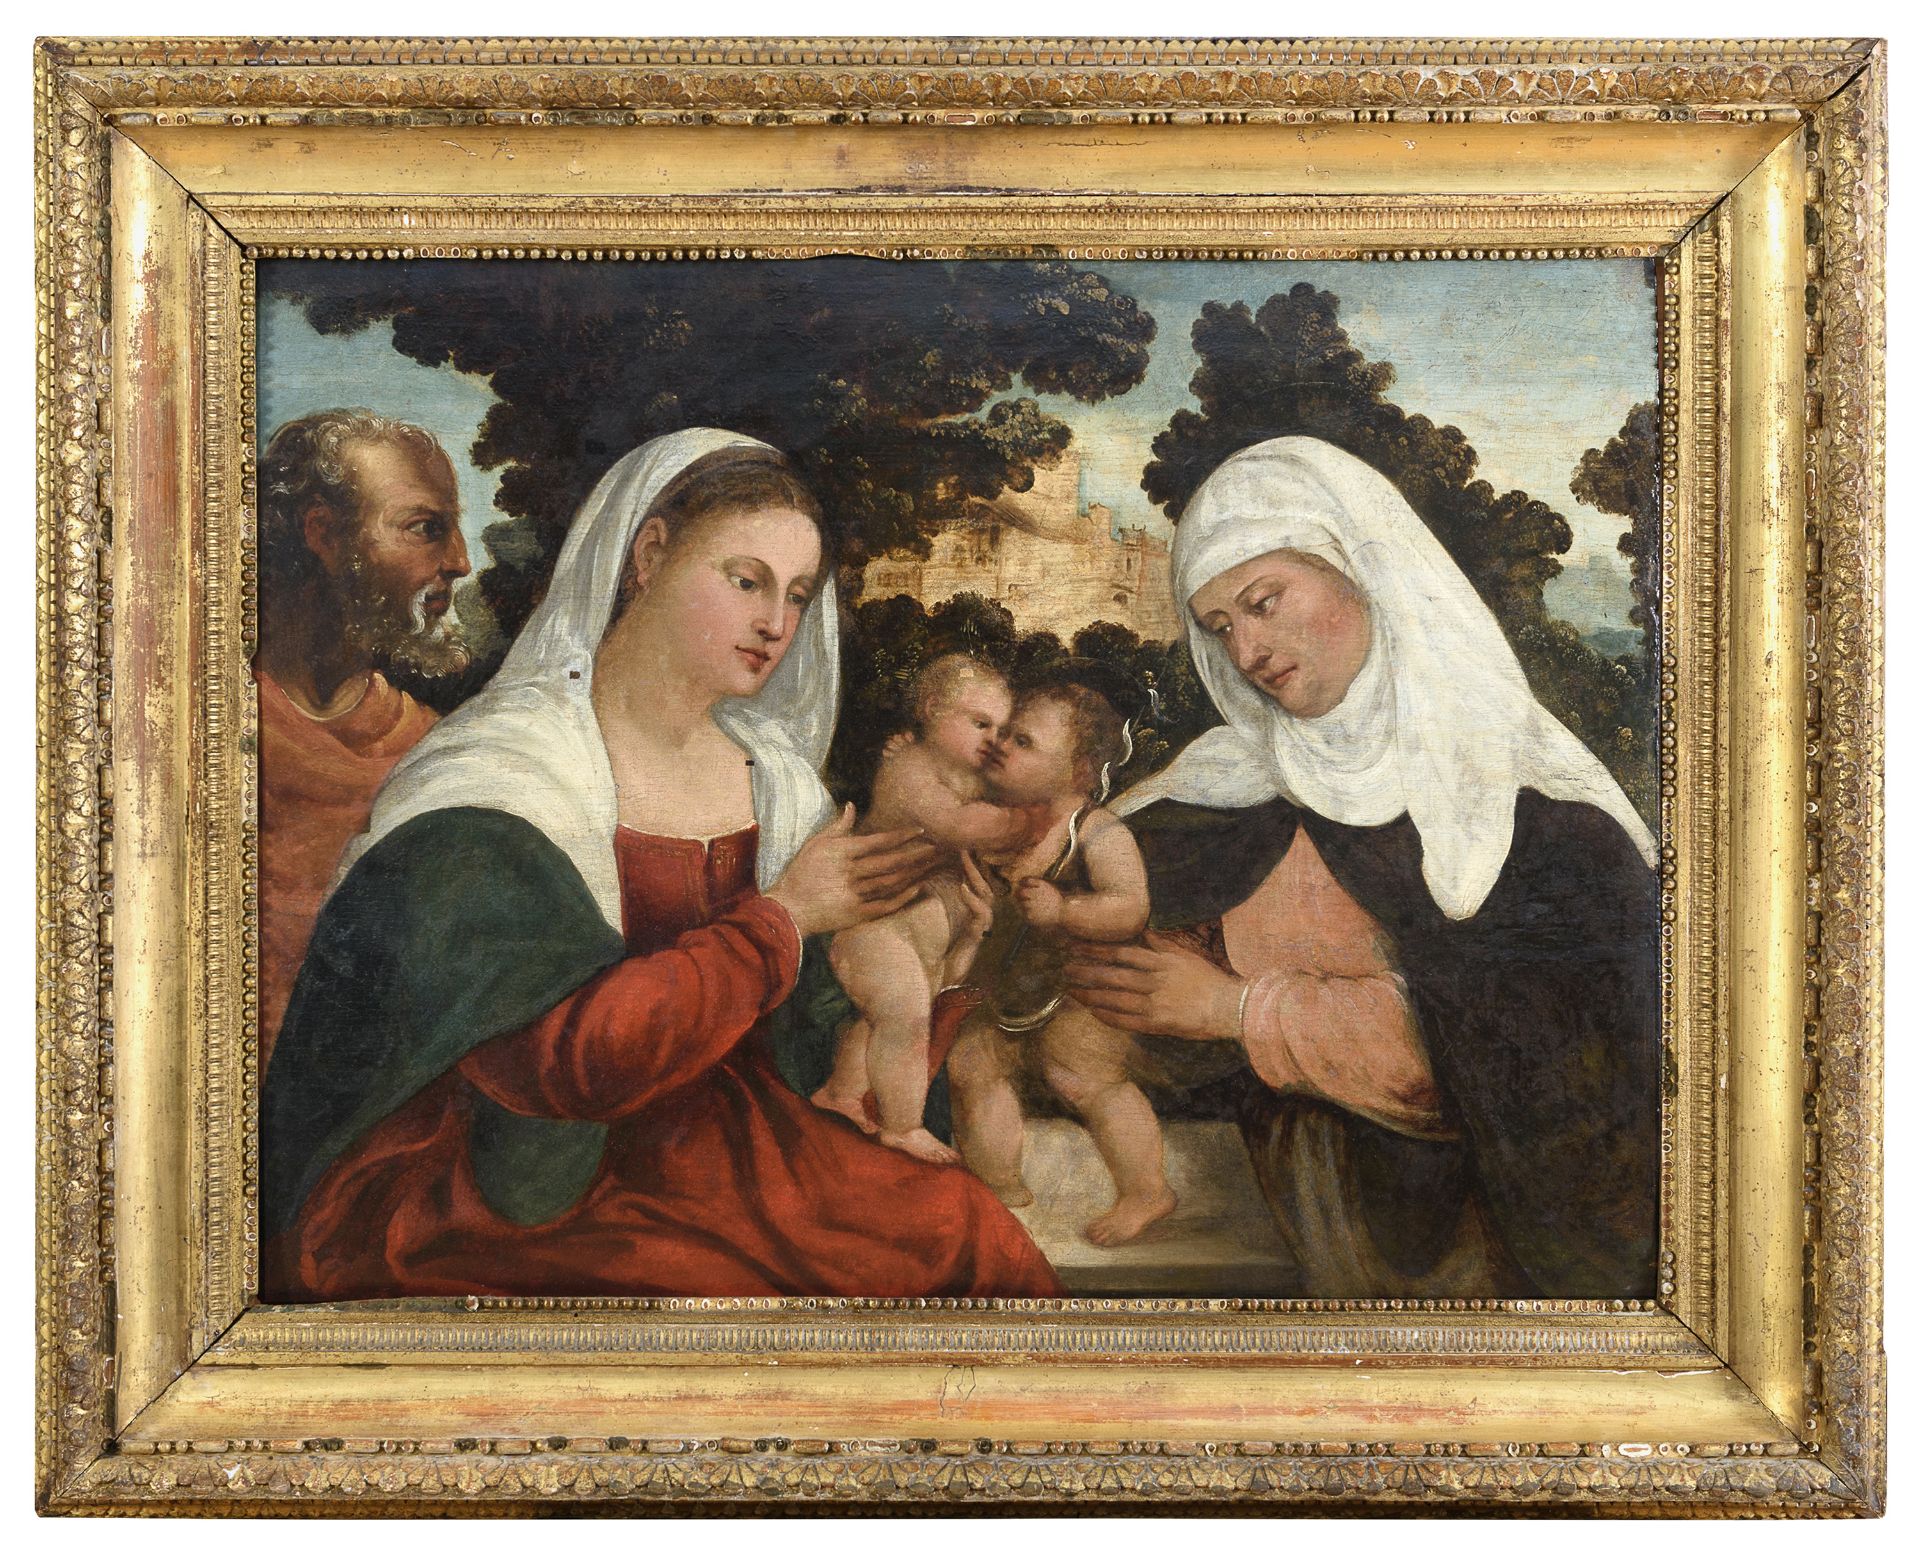 OIL PAINTING OF THE HOLY FAMILY FROM THE WORKSHOP OF PALMA IL VECCHIO